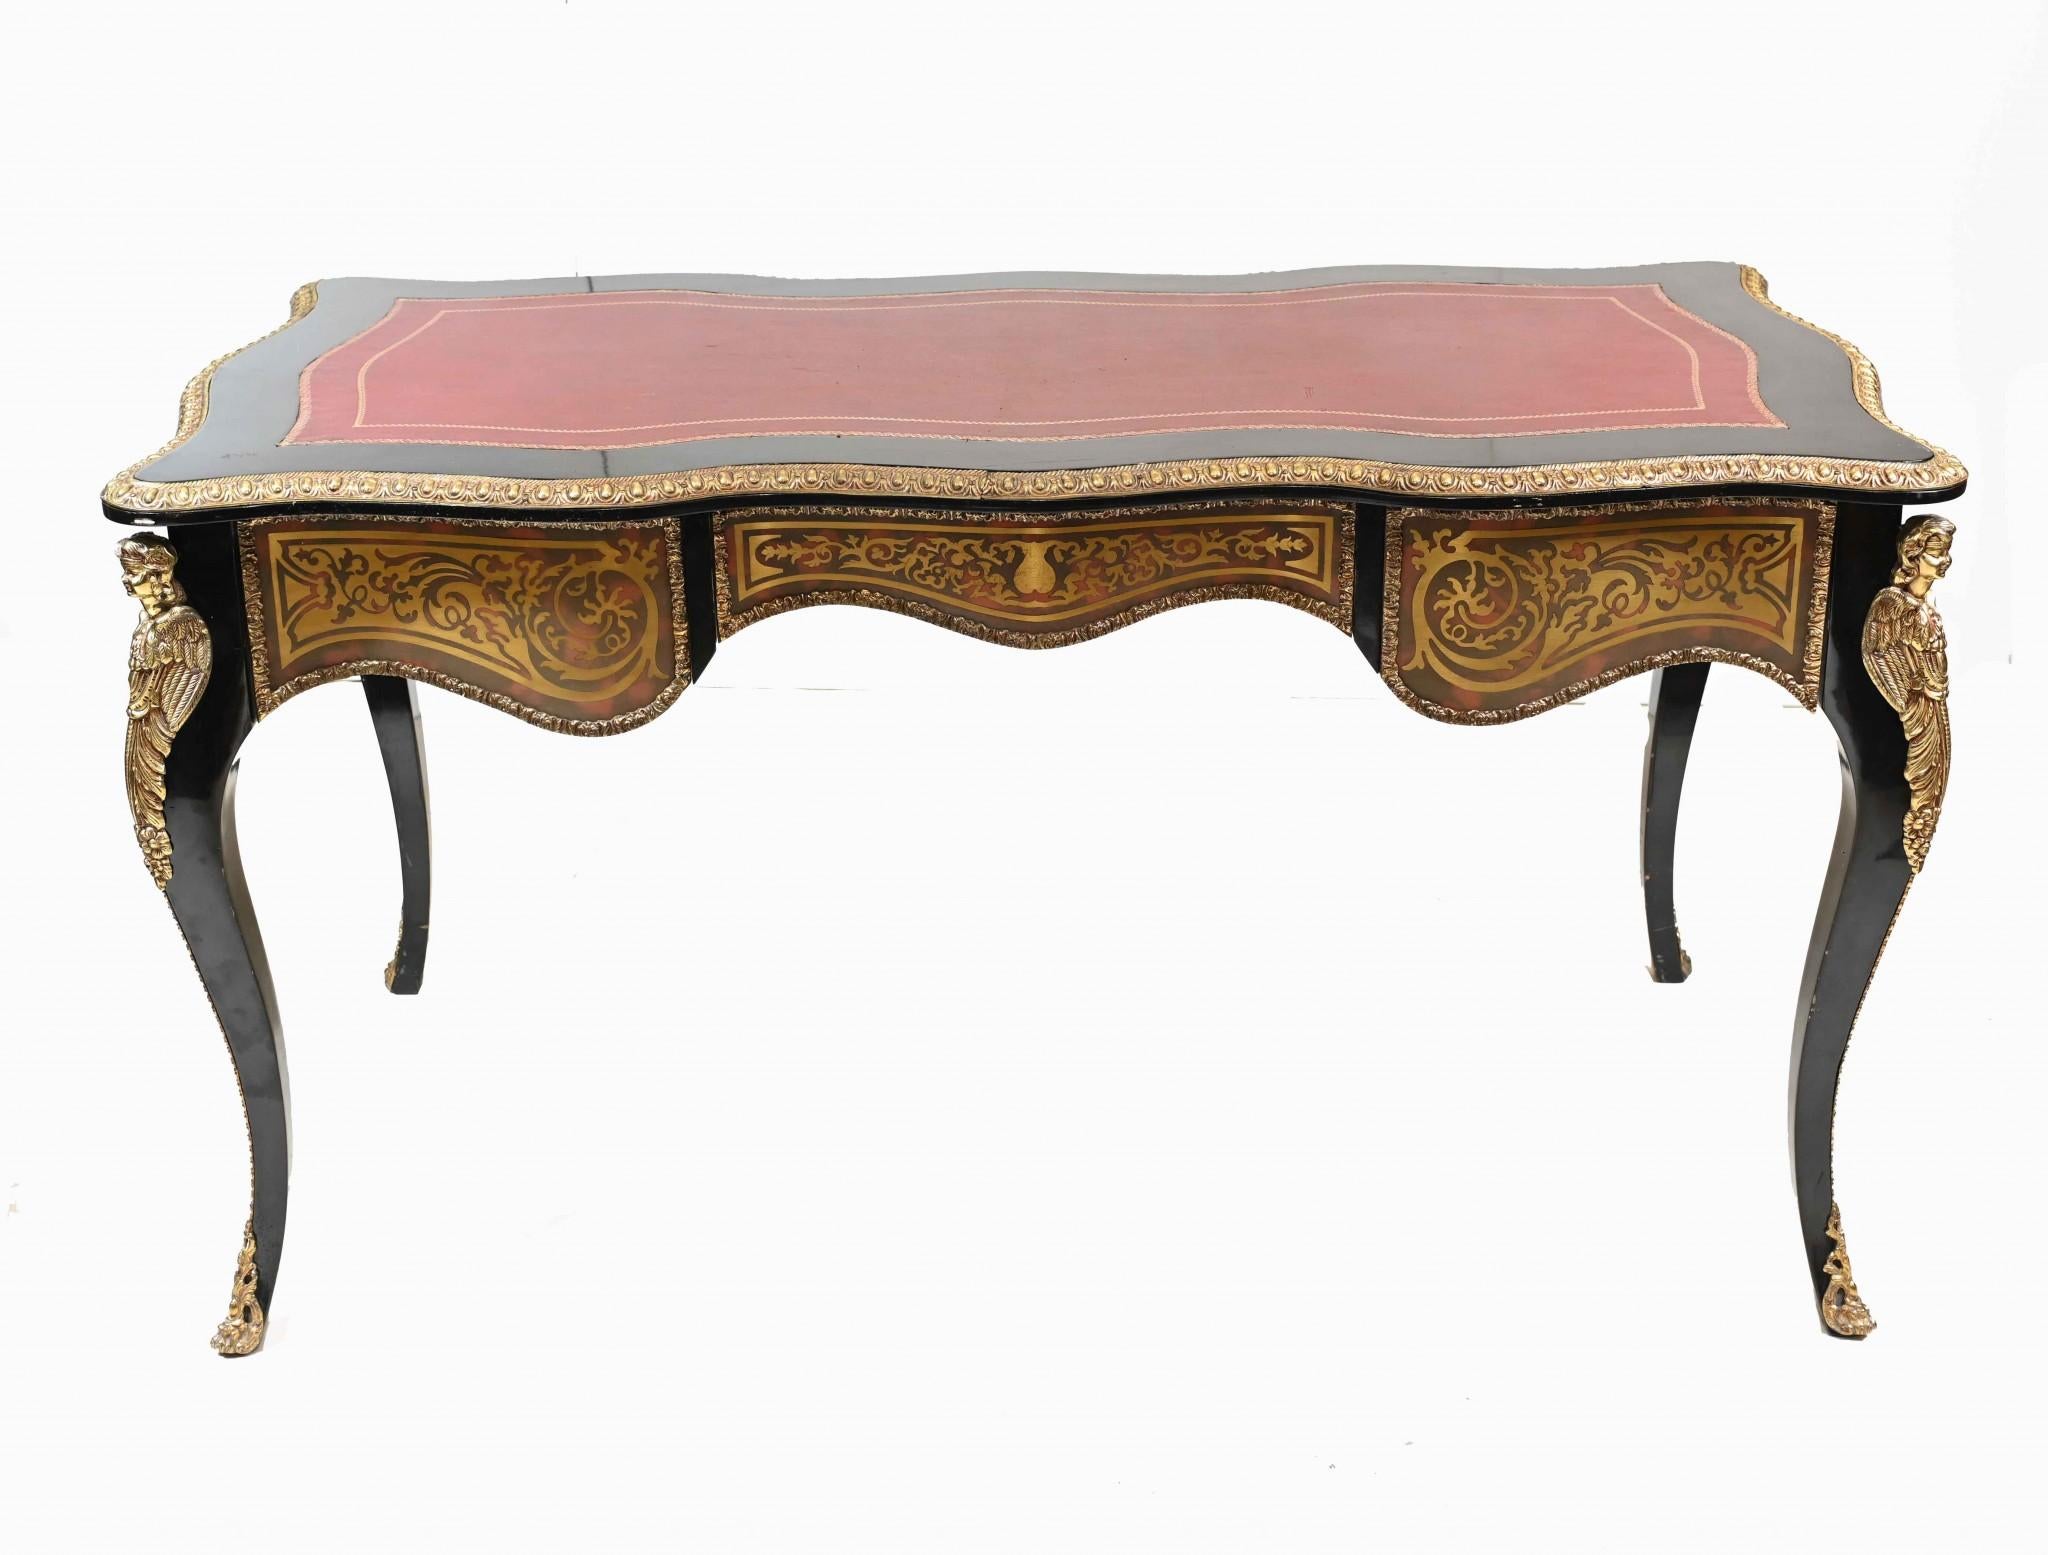 Elegant French bureau plat in the Boulle manner
The first thing that really attracted us to this was the elegant shape
Features intricate Boulle inlay on all surfaces, lacquer and brass and faux tort
Good size writing surface with pink tooled